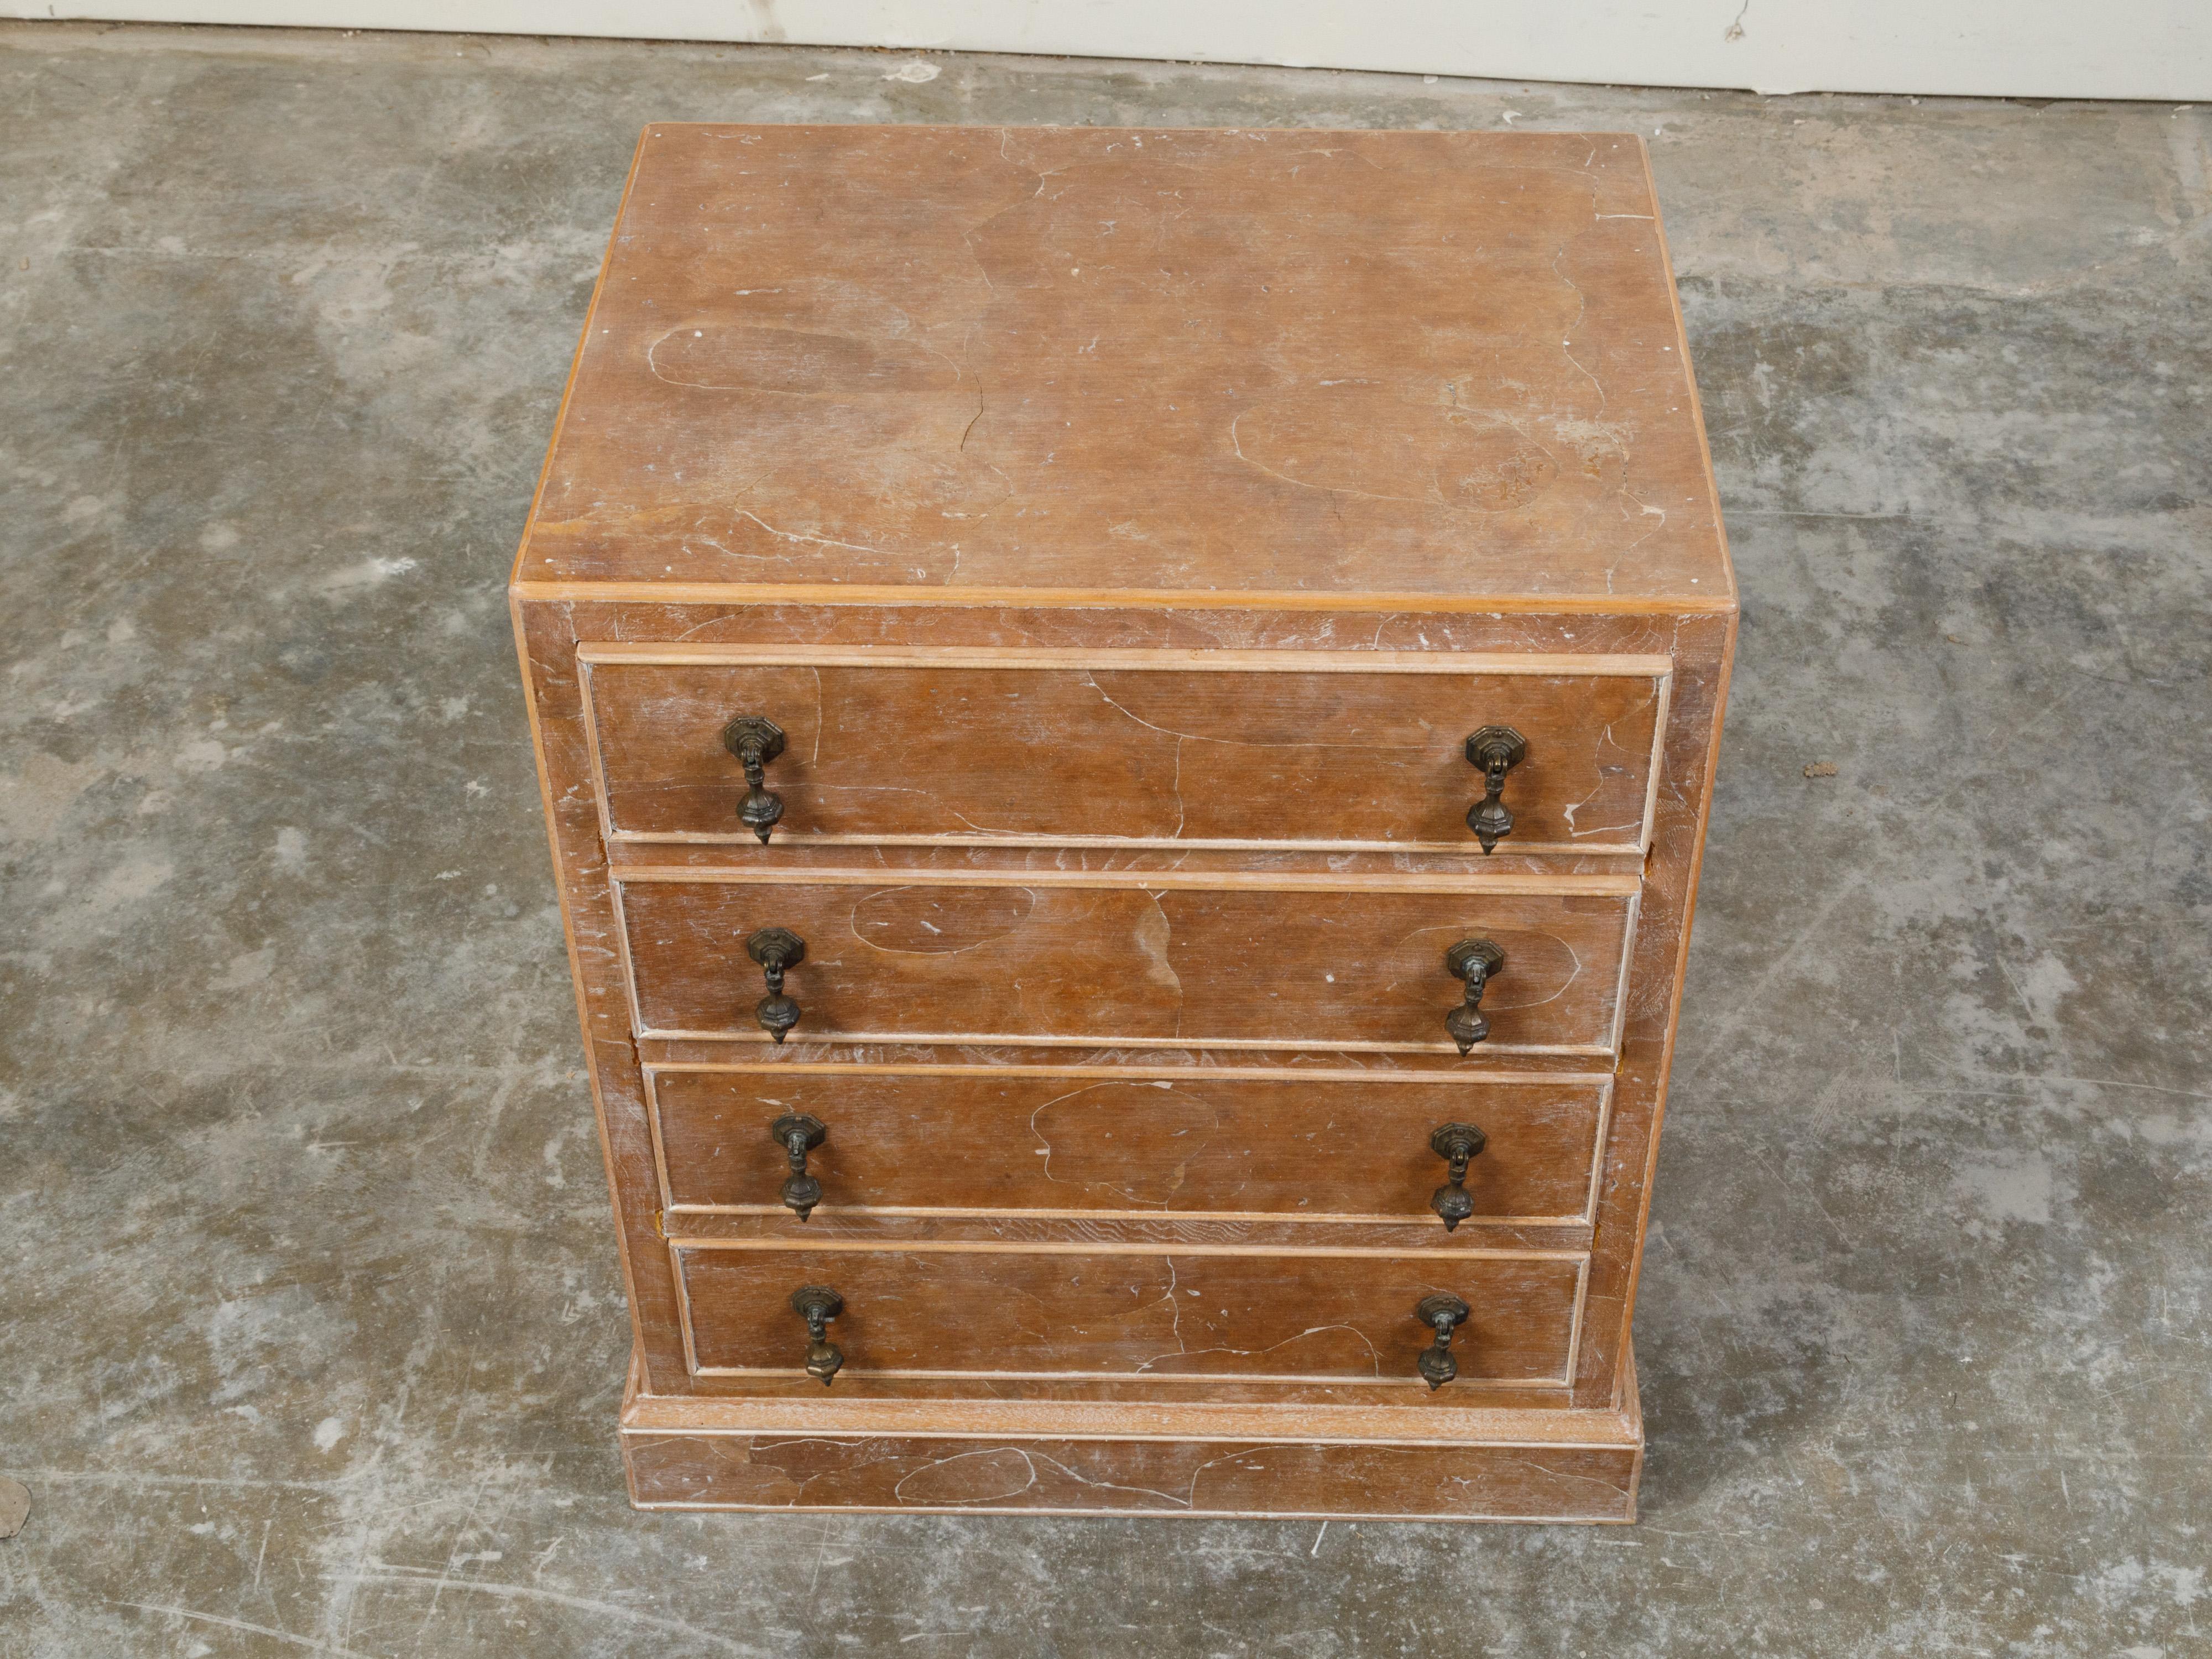 20th Century Small English Burl Wood Chest with Four Drawers and Distressed Finish For Sale